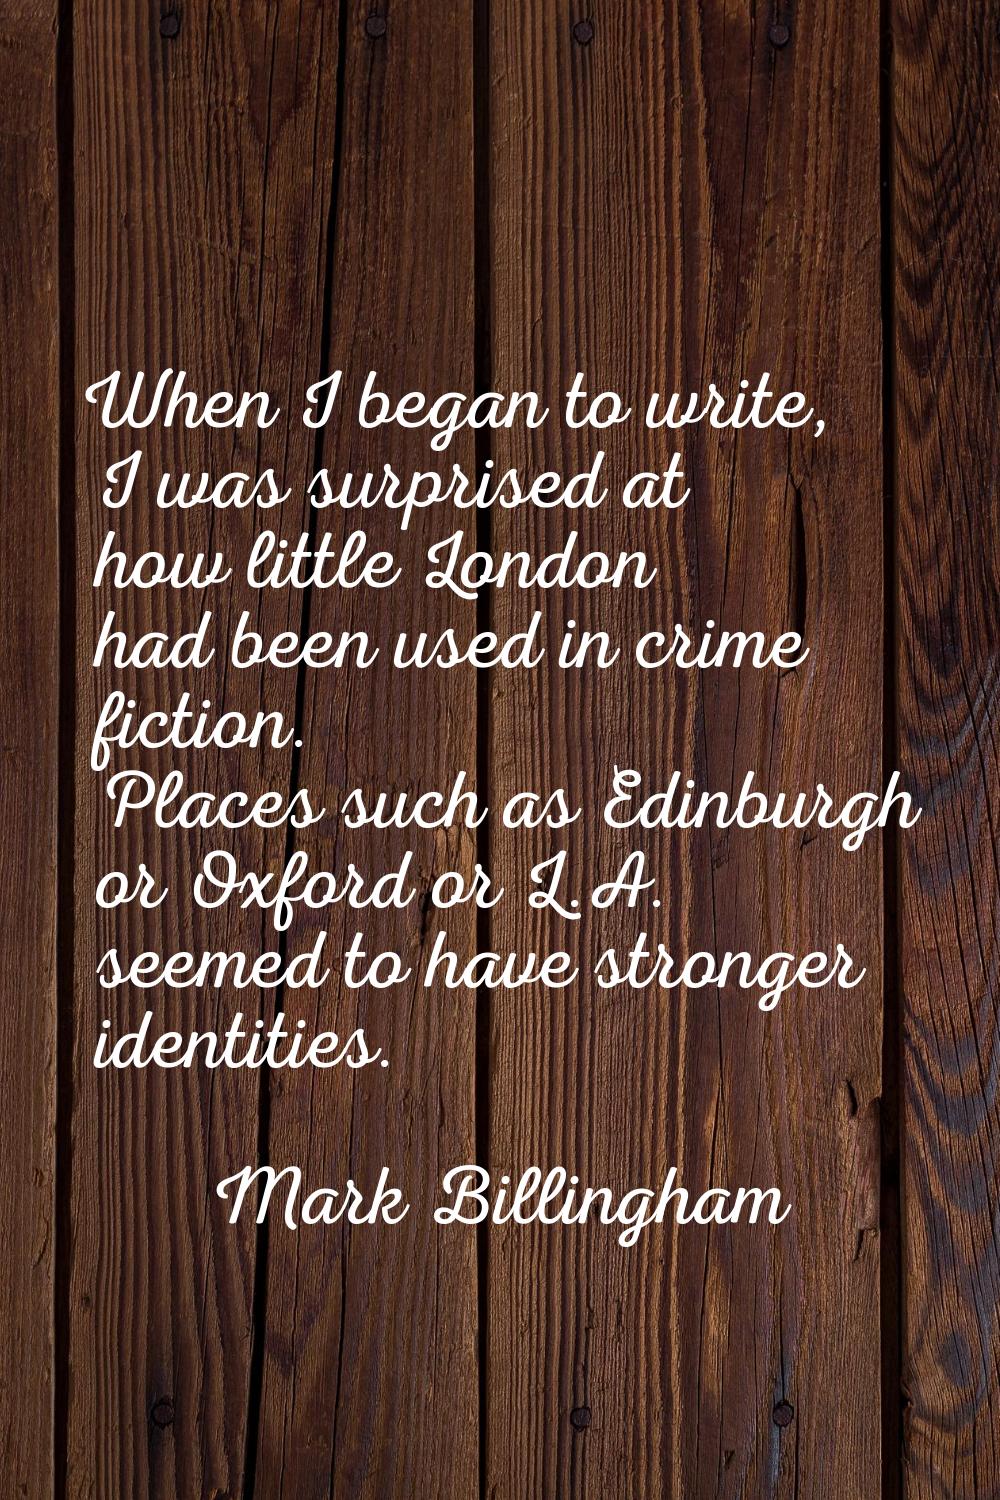 When I began to write, I was surprised at how little London had been used in crime fiction. Places 